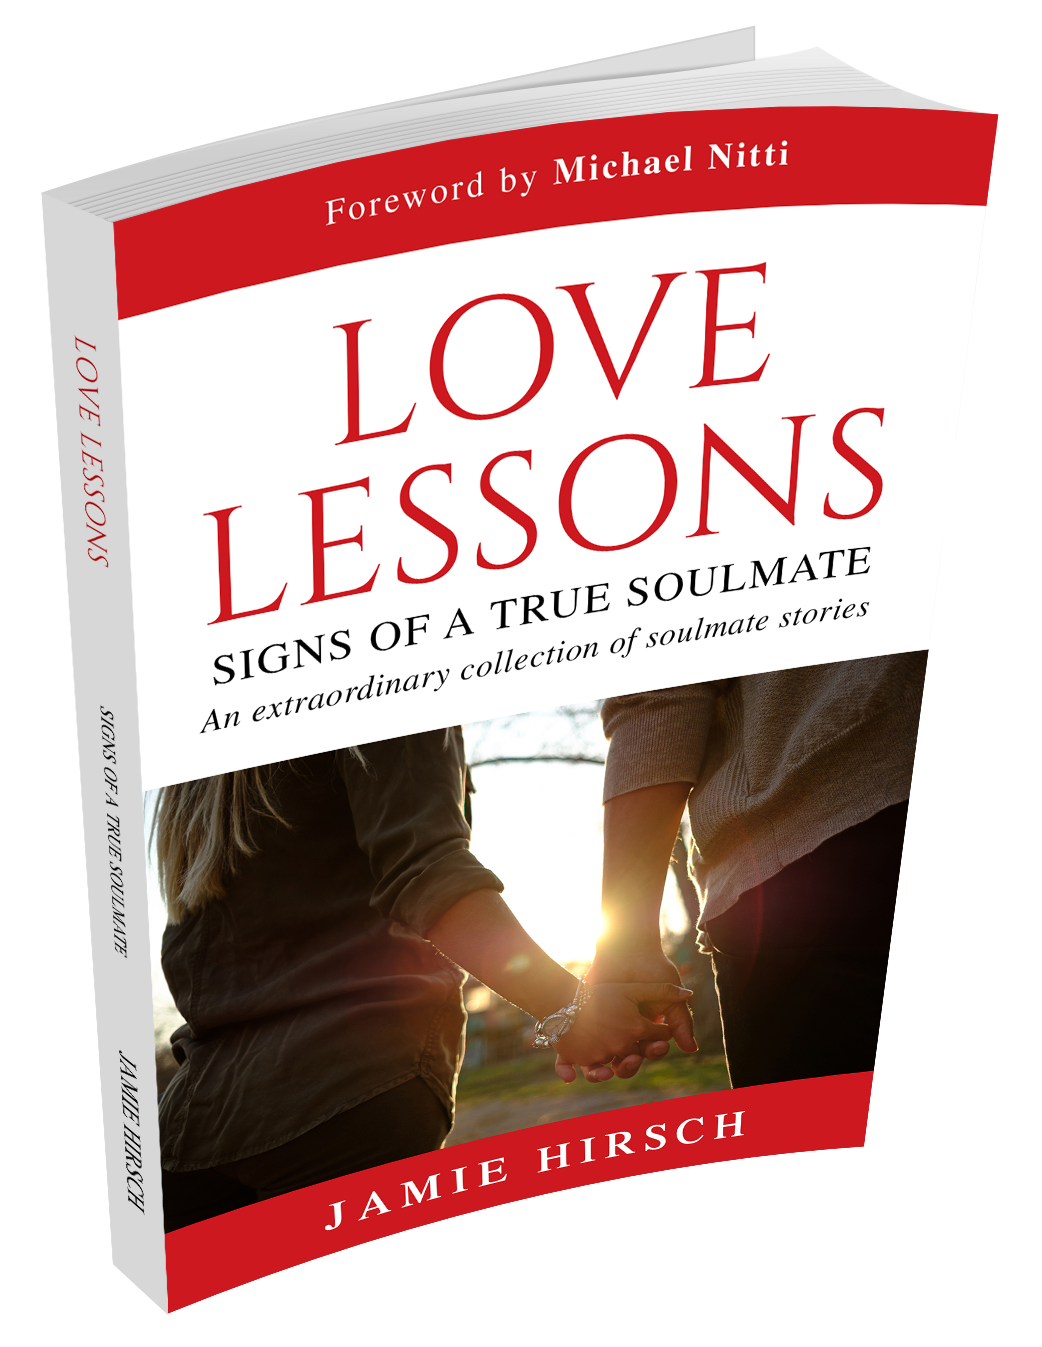 Love Lessons: Signs of a True Soulmate'